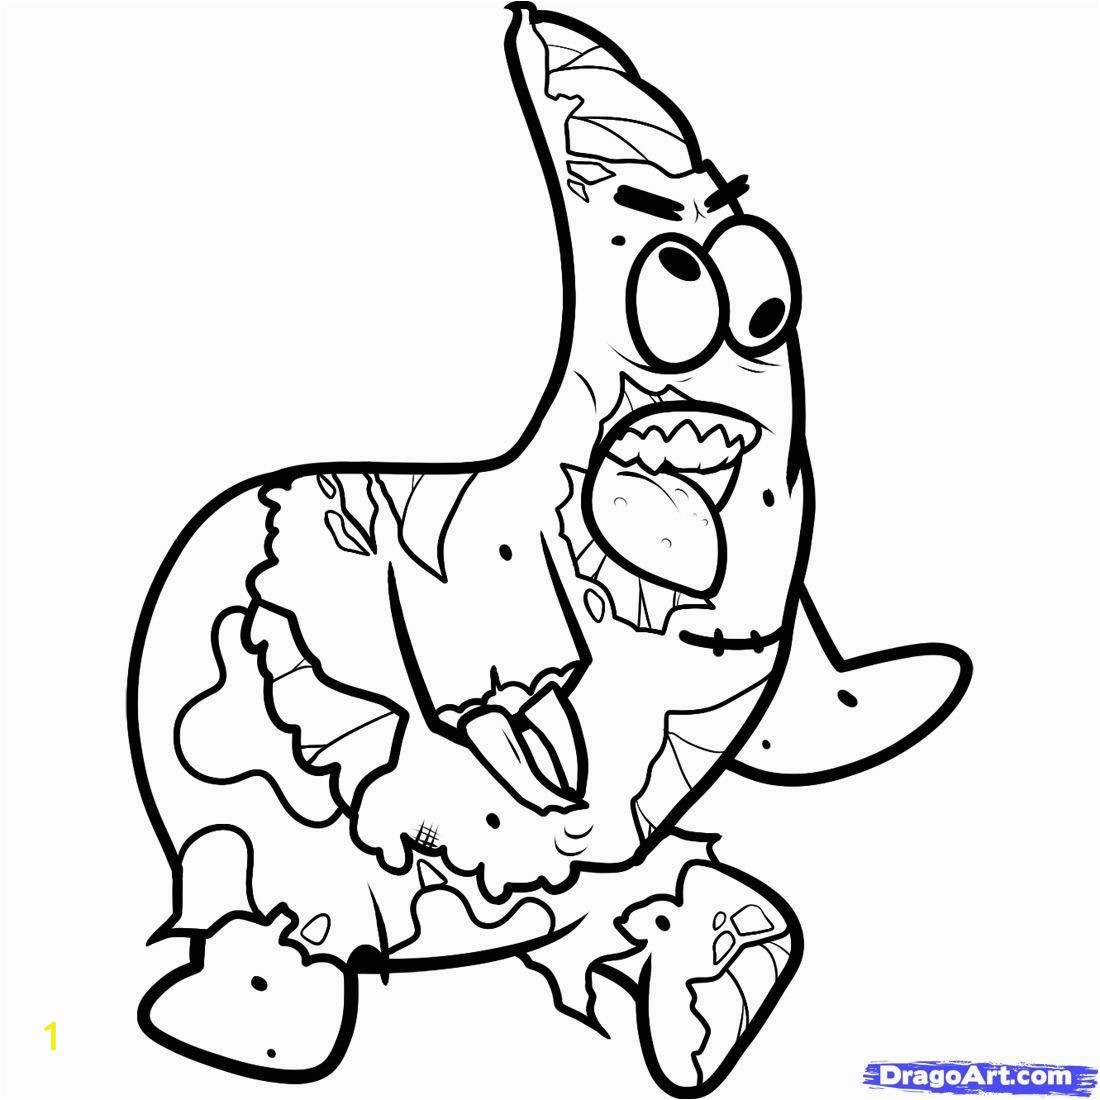 Disney Zombies Printable Coloring Pages 11 Pics Of Easy Zombie Coloring Page Zombie Spongebob